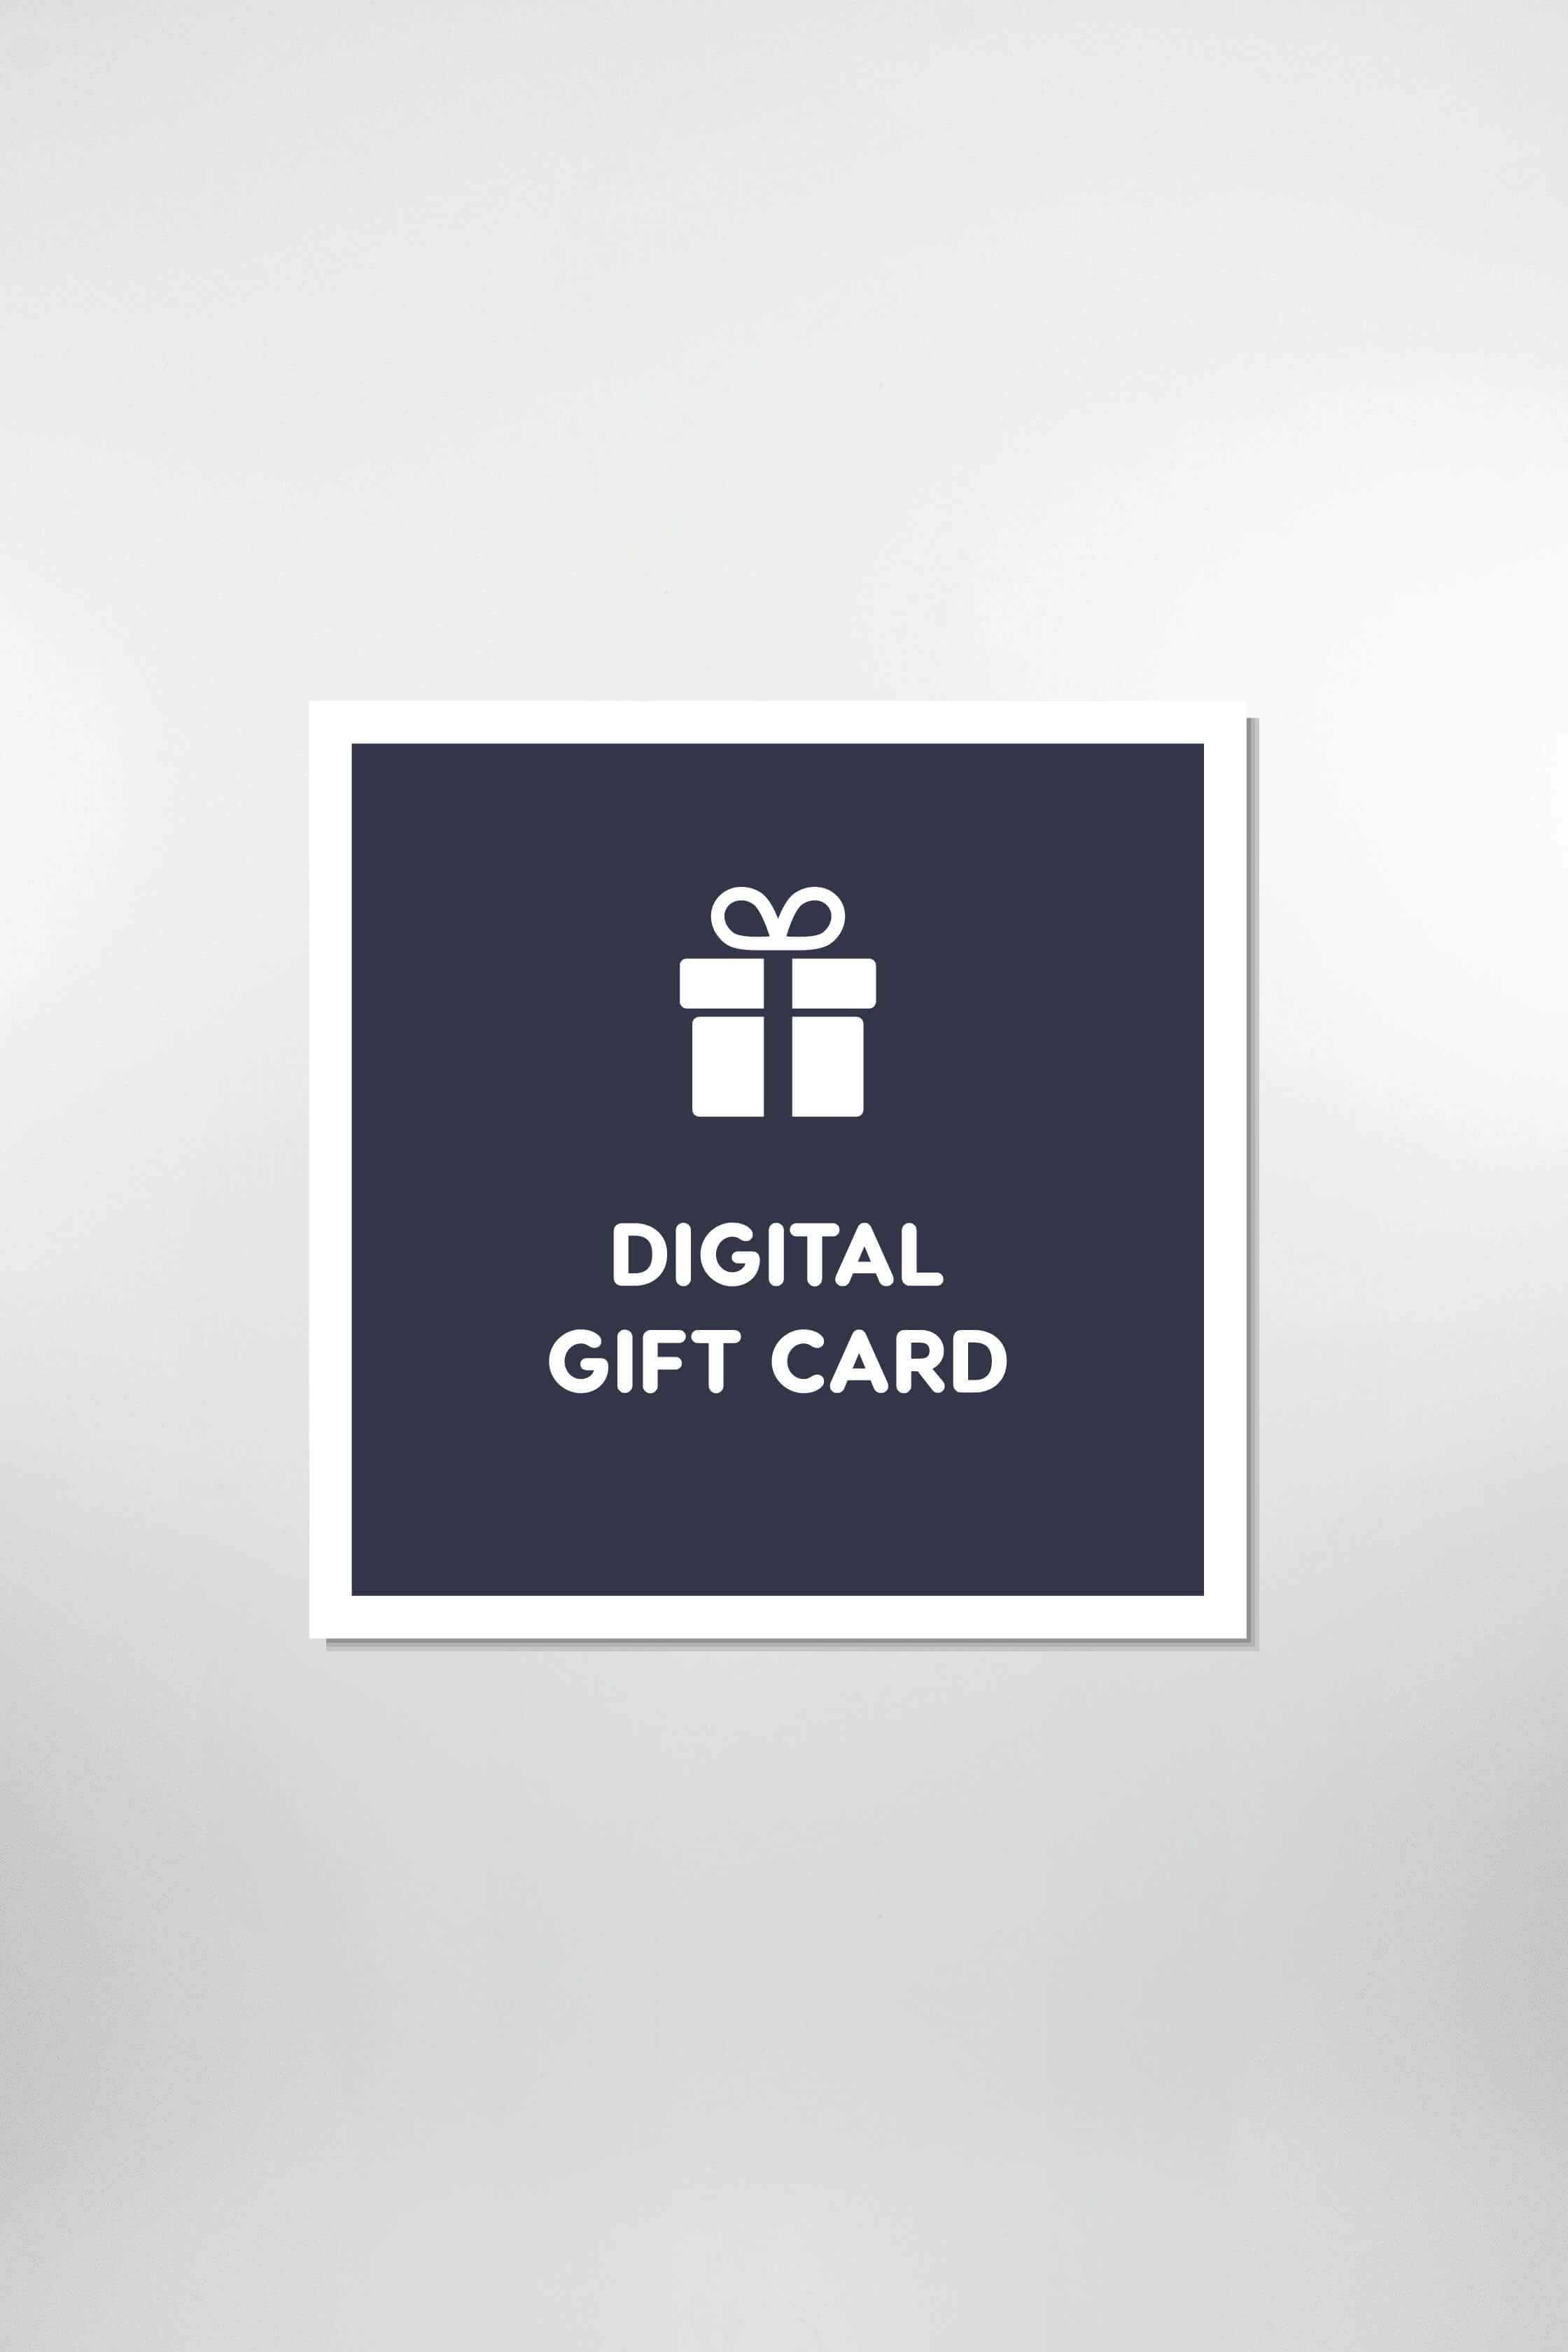 A digital gift card from Arctic Legacy